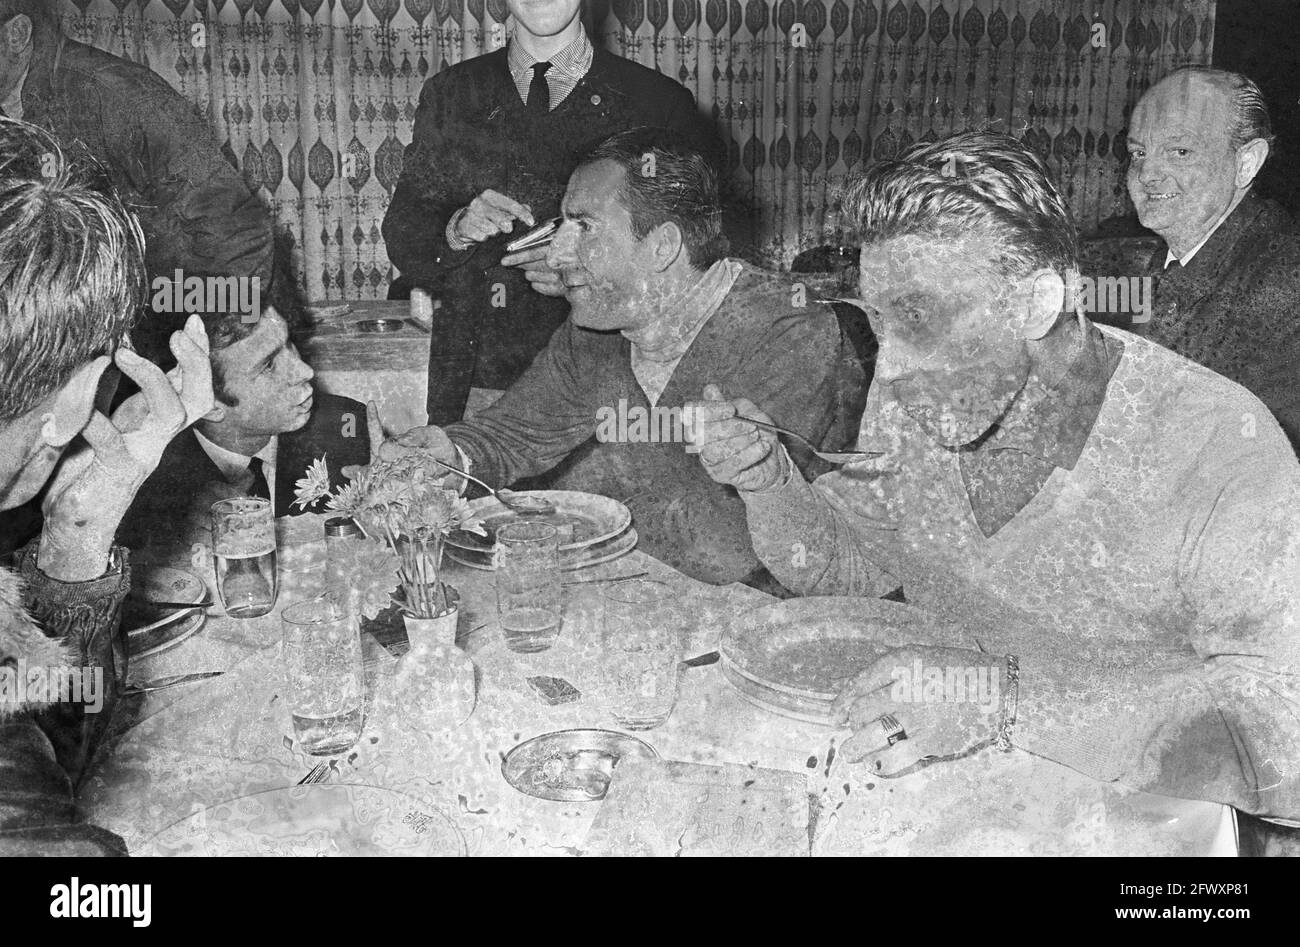 Rally de Monte Carlo , two famous cyclists R. Geminiani (l) and Jacques Anquetil ride together, during dinner, January 16, 1965, diners, The Netherlan Stock Photo